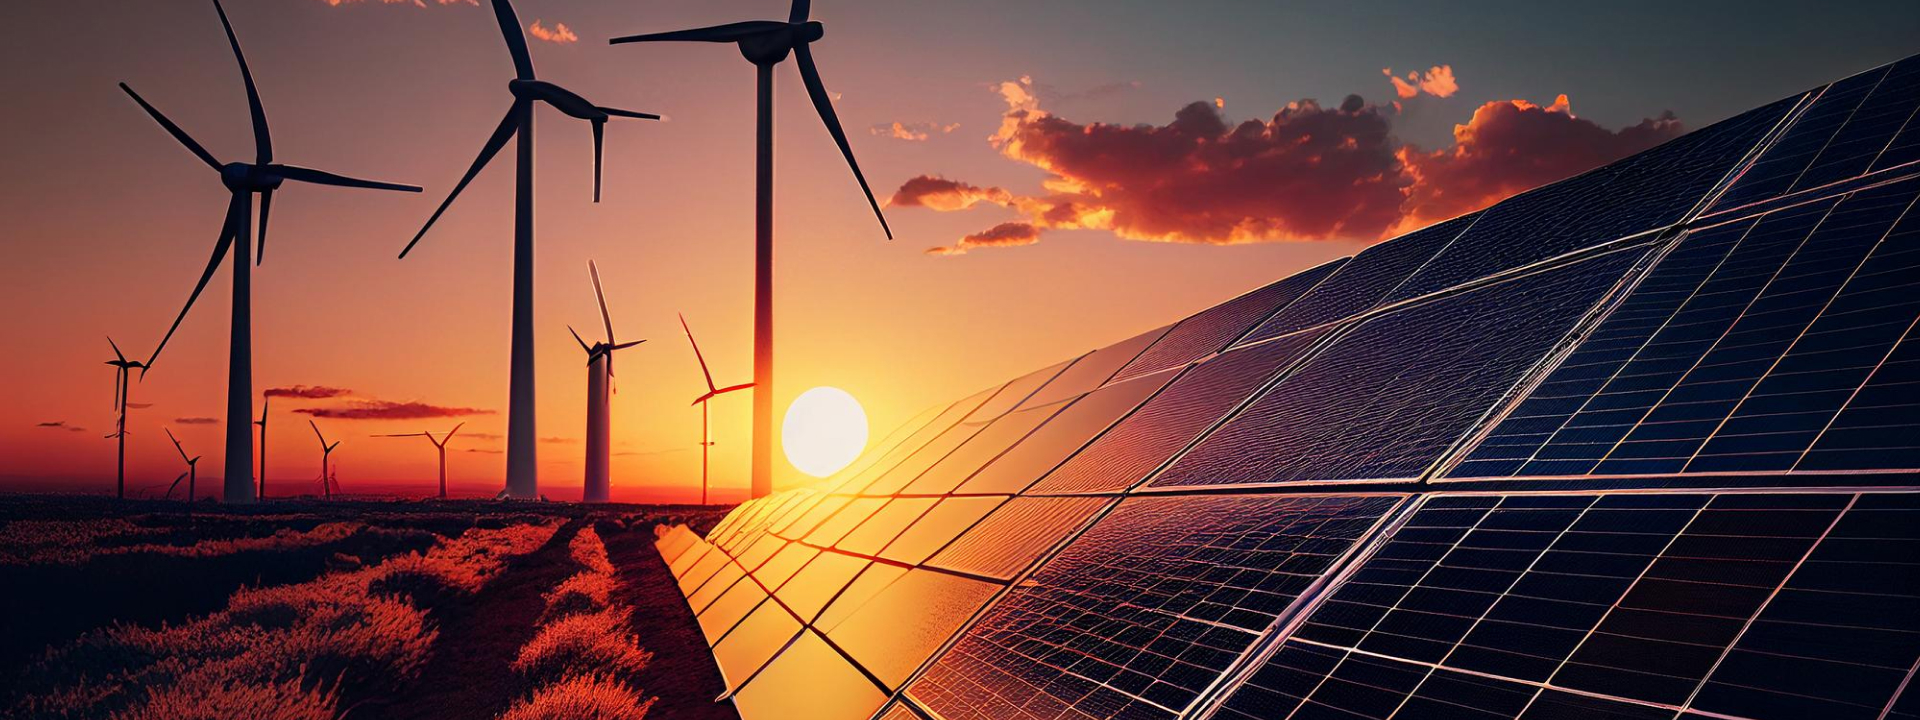 Big Data is Changing the Outlook of the Renewable Energy Sector